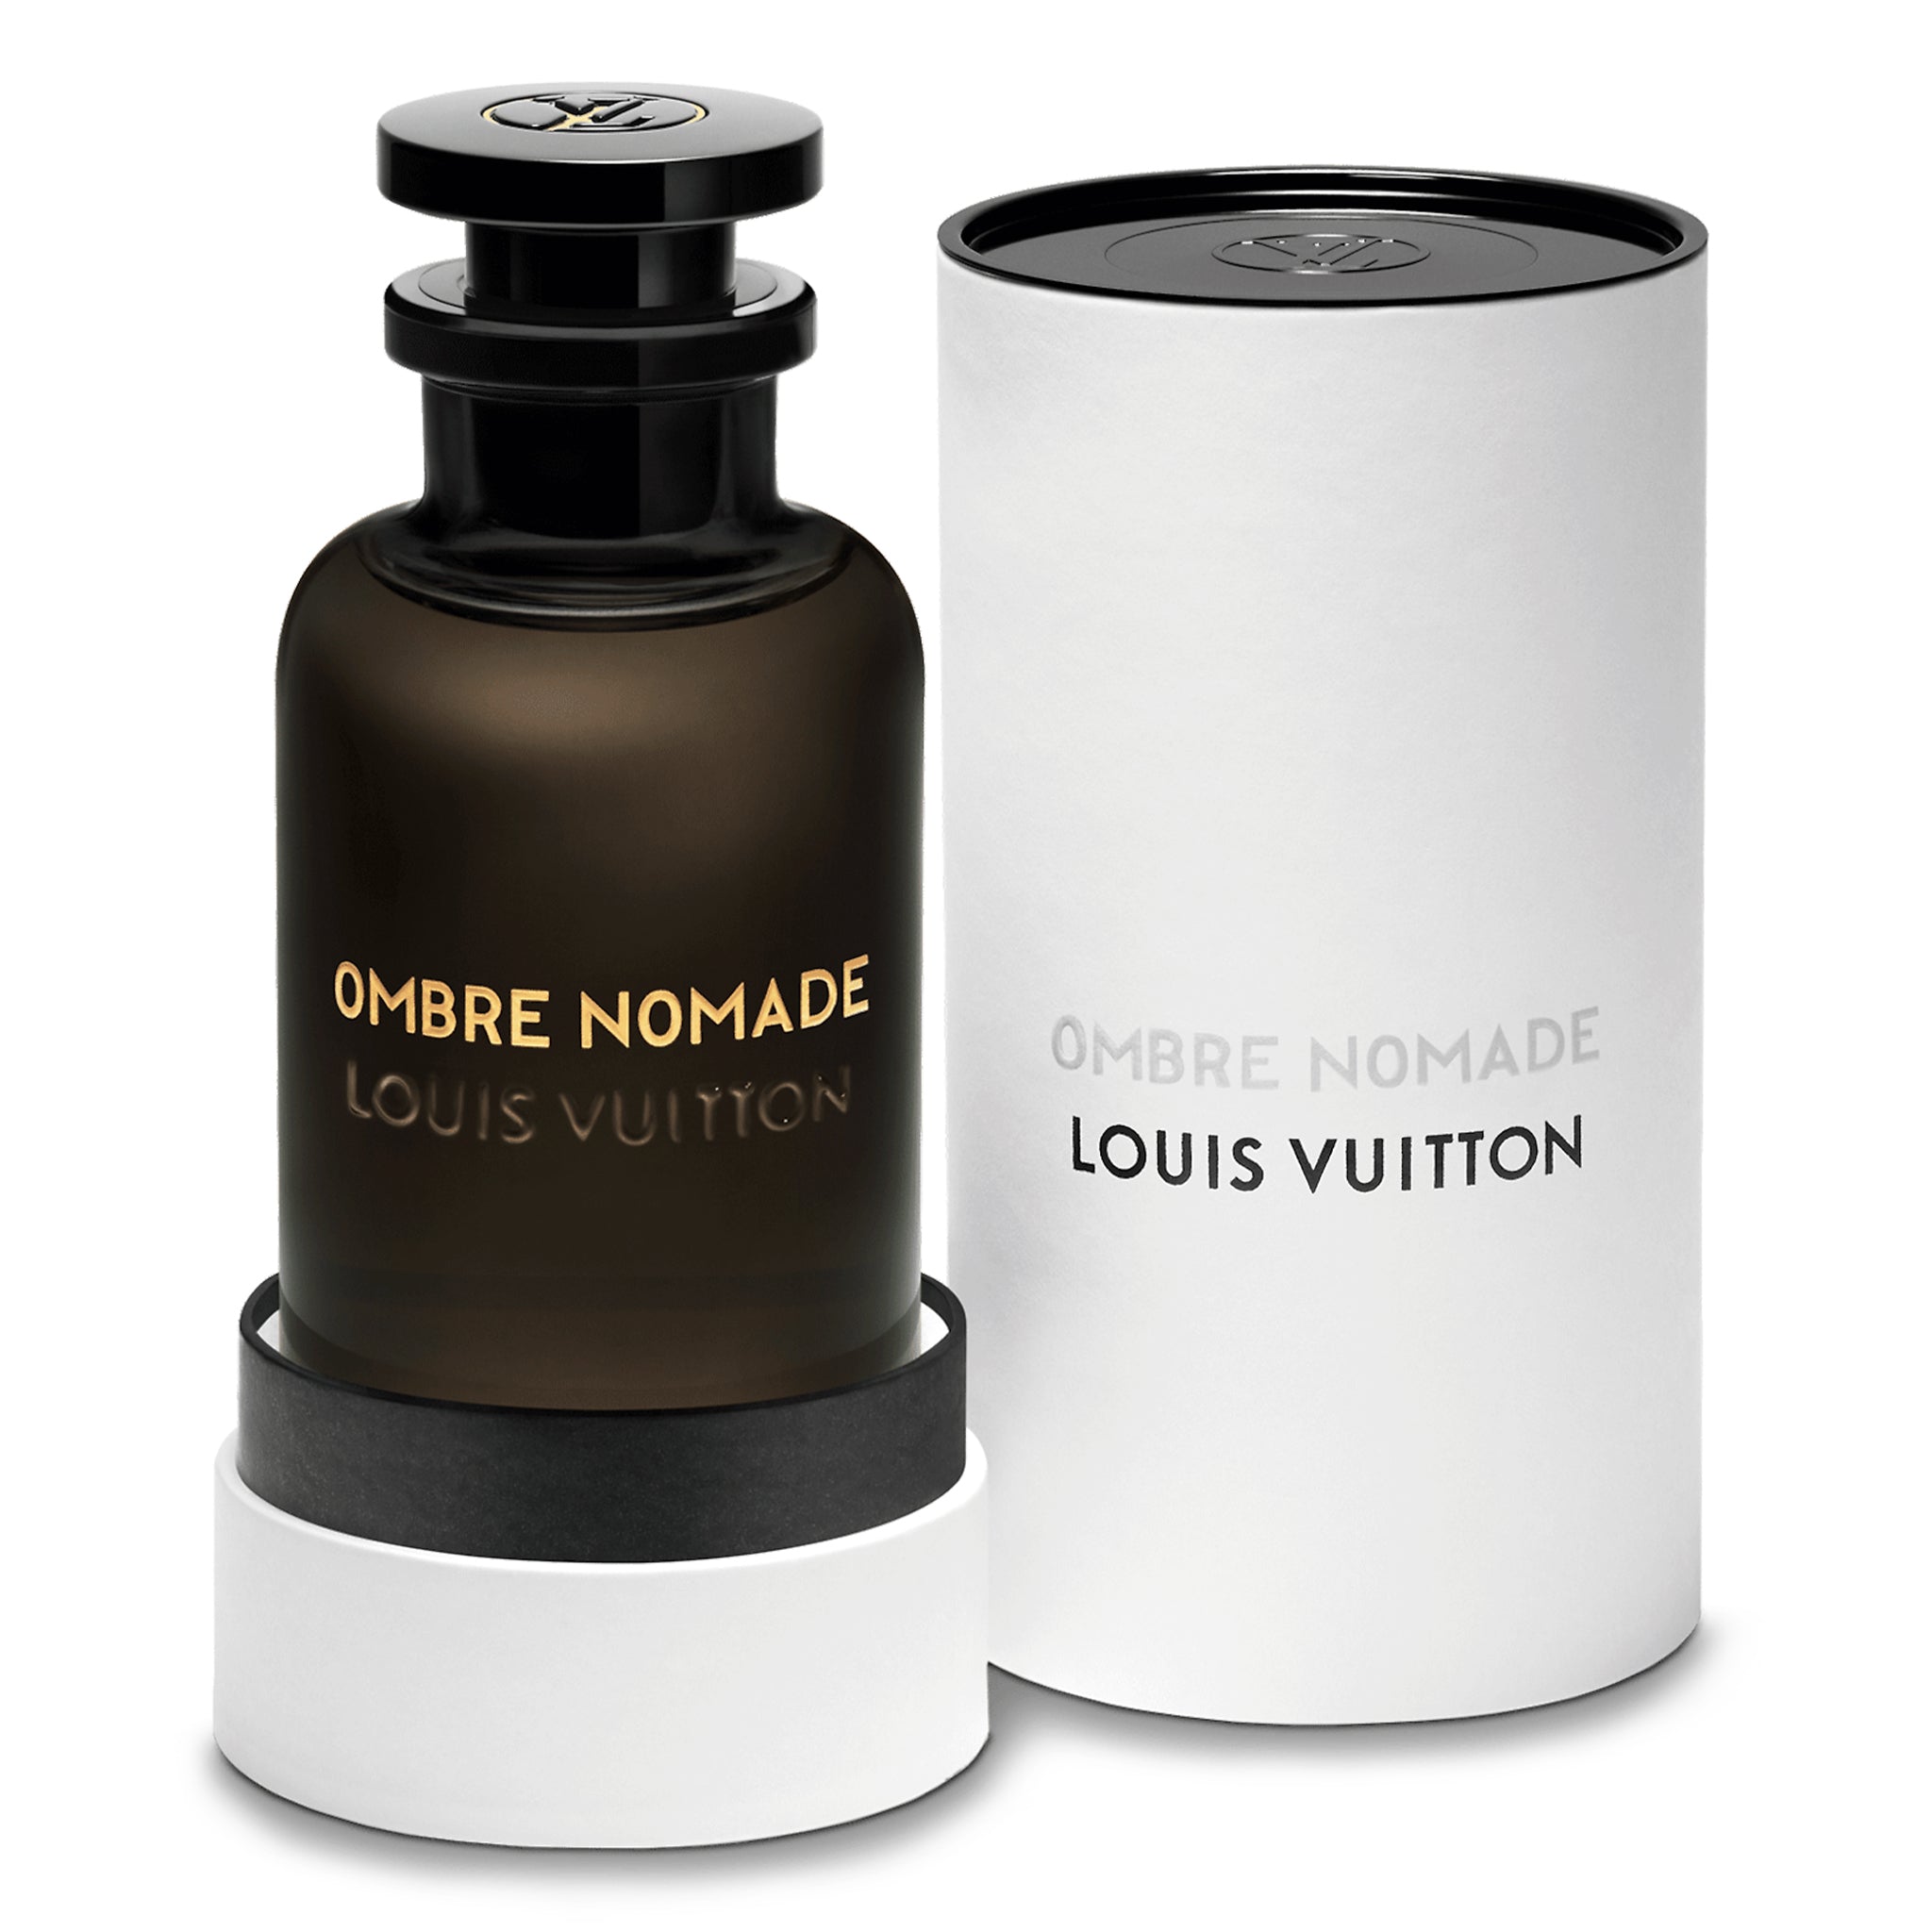 Louis Vuitton Ombre Nomade- the new campaign from Les Parfums Louis Vuitton